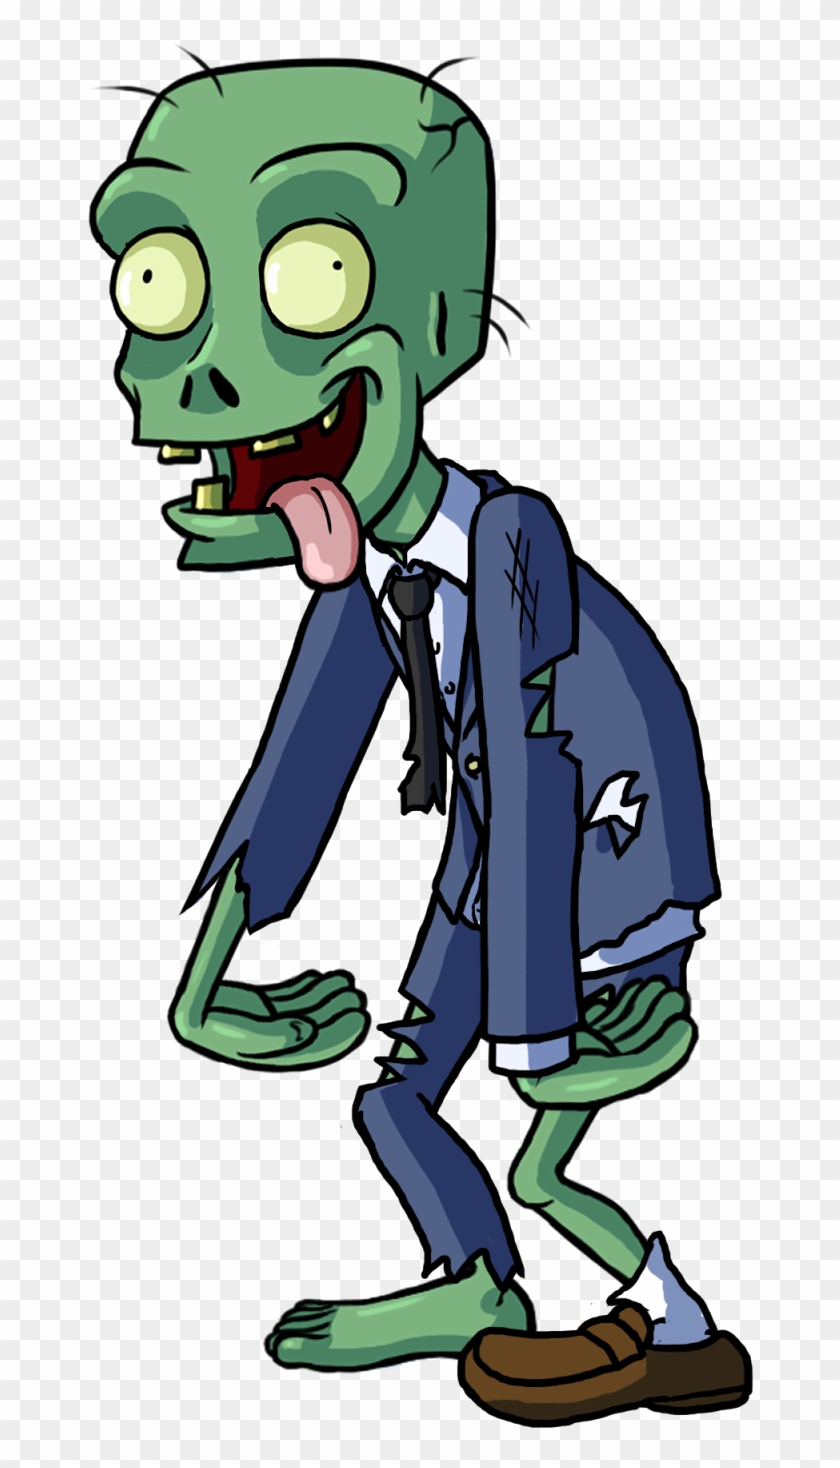 Zombie - Cartoon Zombie Transparent Background Clipart (#333583) - PikPng